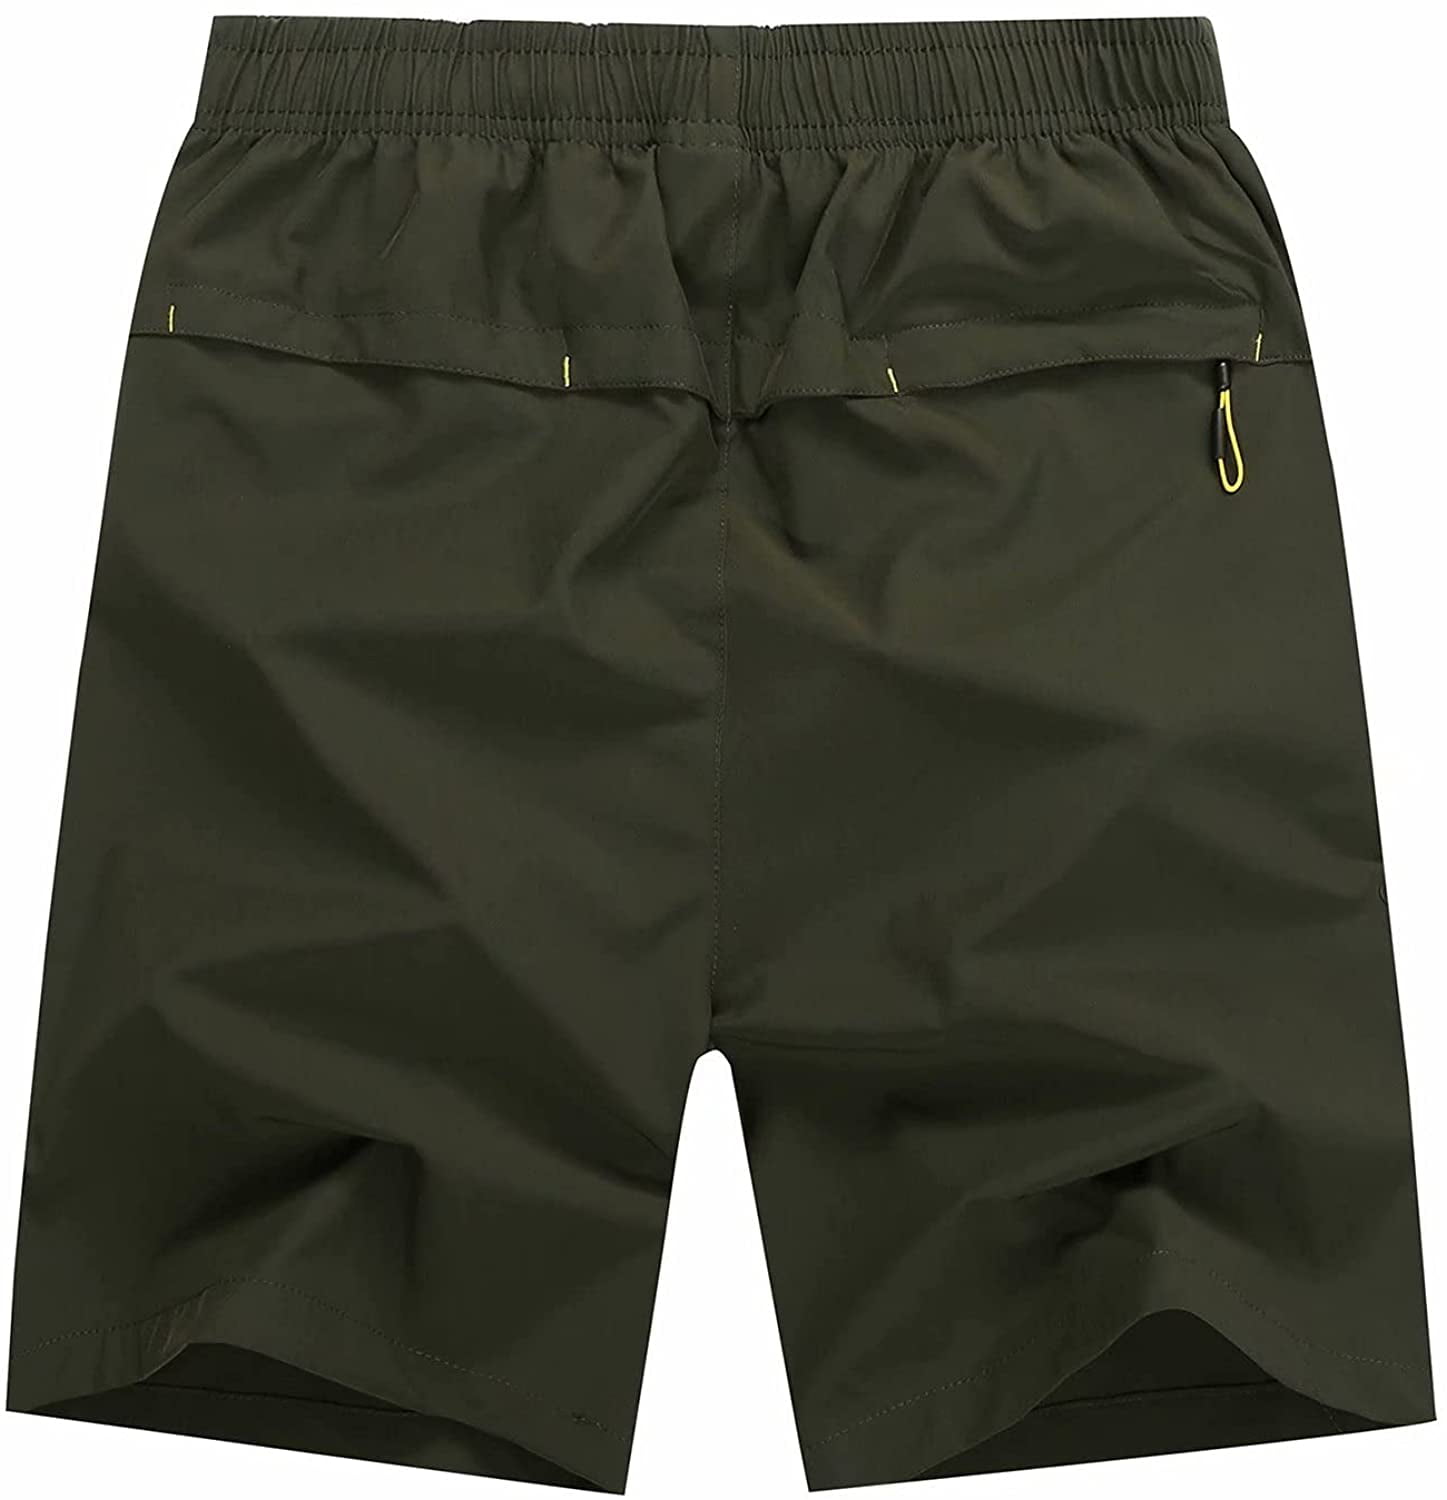 MAGCOMSEN Mens Outdoor Quick Dry Hiking Shorts Running Workout Shorts with Zipper Pockets 